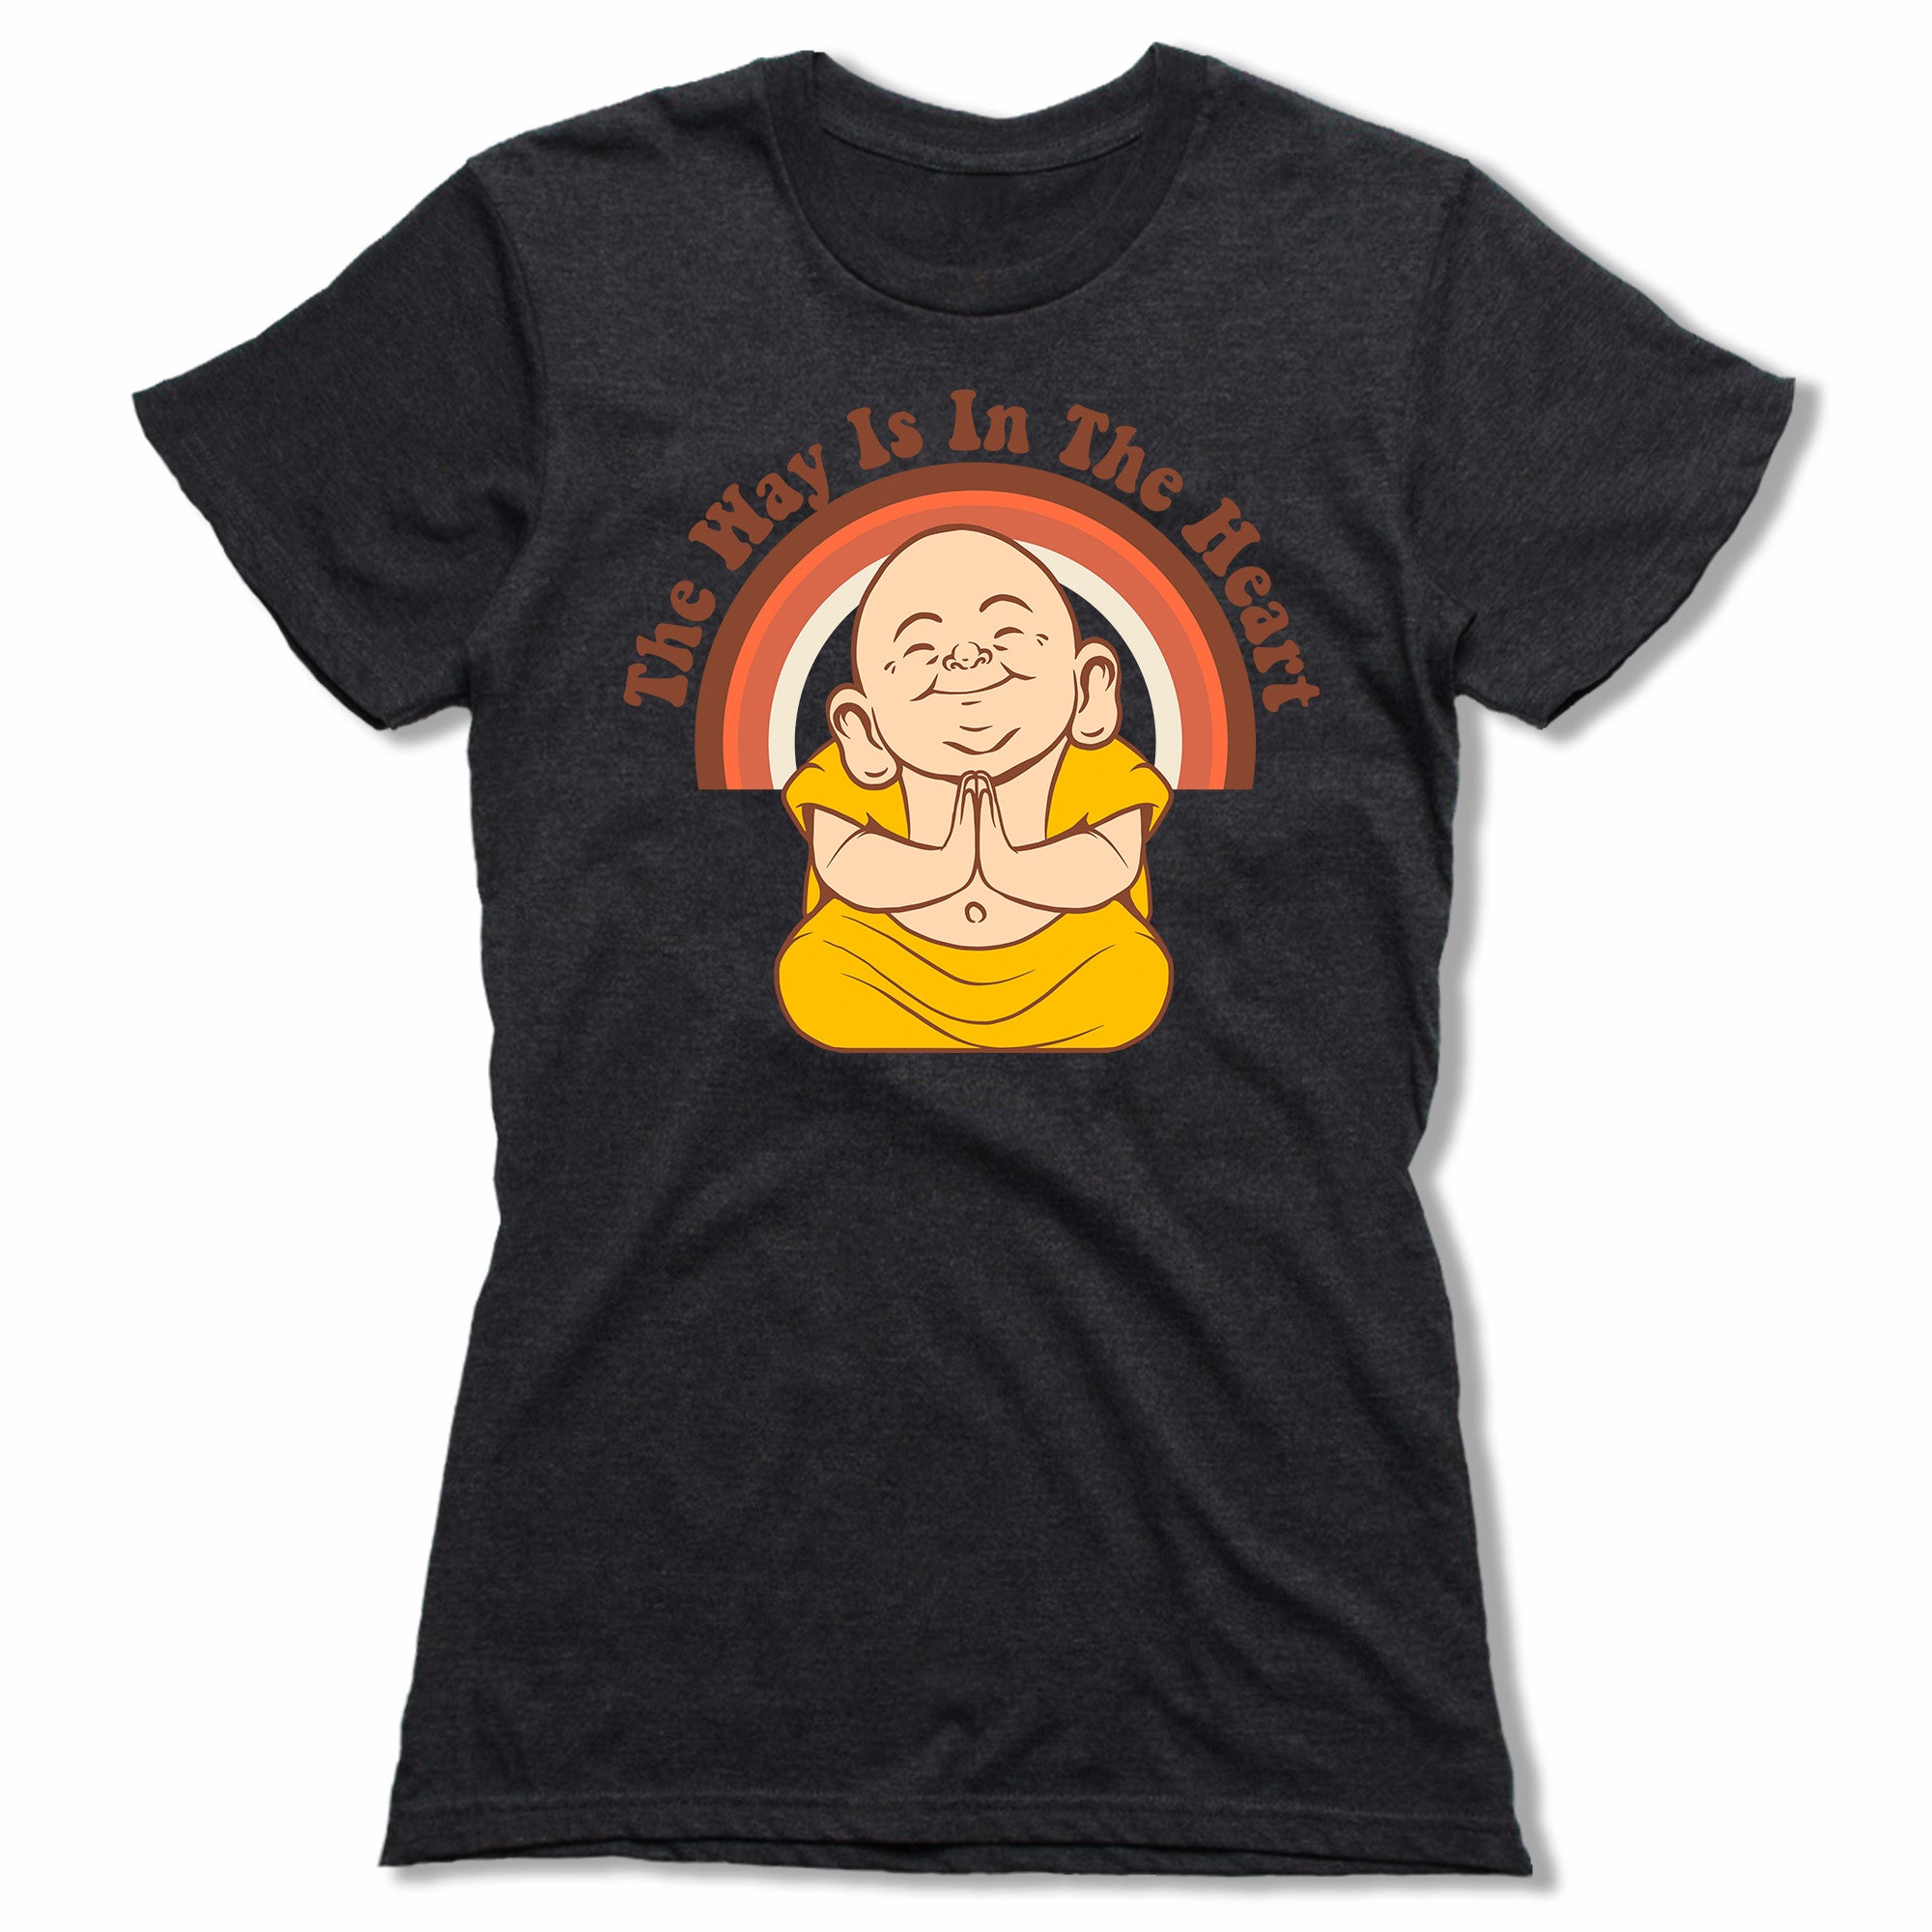 The-Way-Is-In-The-Heart-Bitty-Buda-Women-T-Shirt-Black